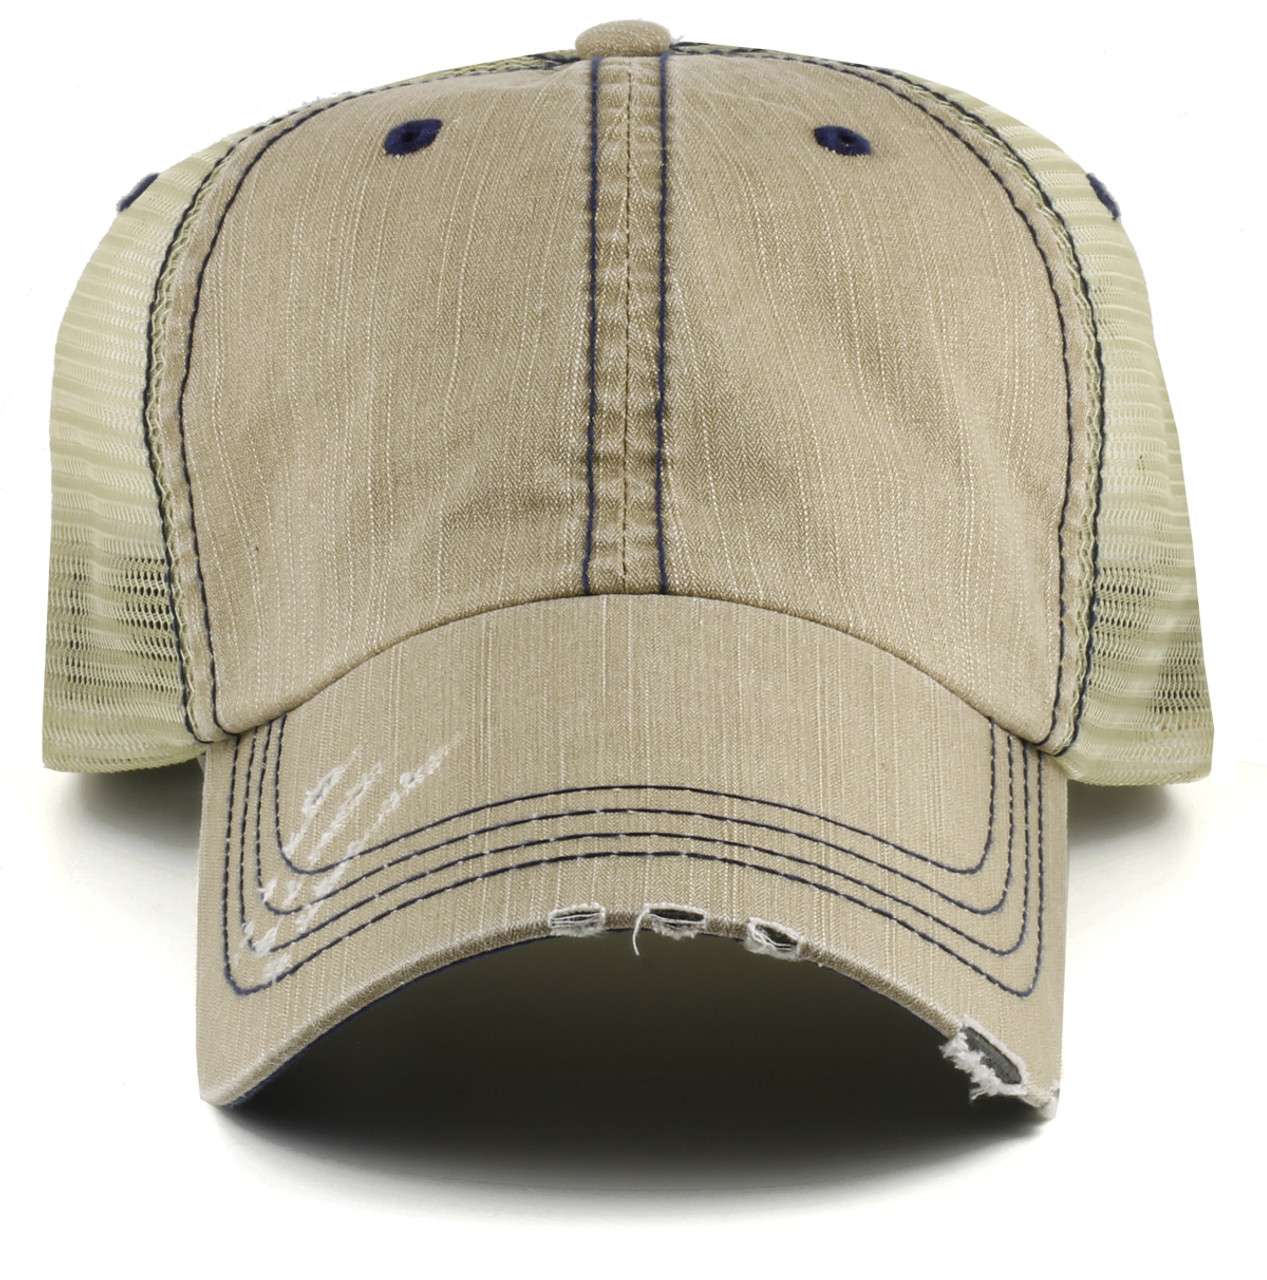 Low Profile Trucker Mesh Hats for Big Heads